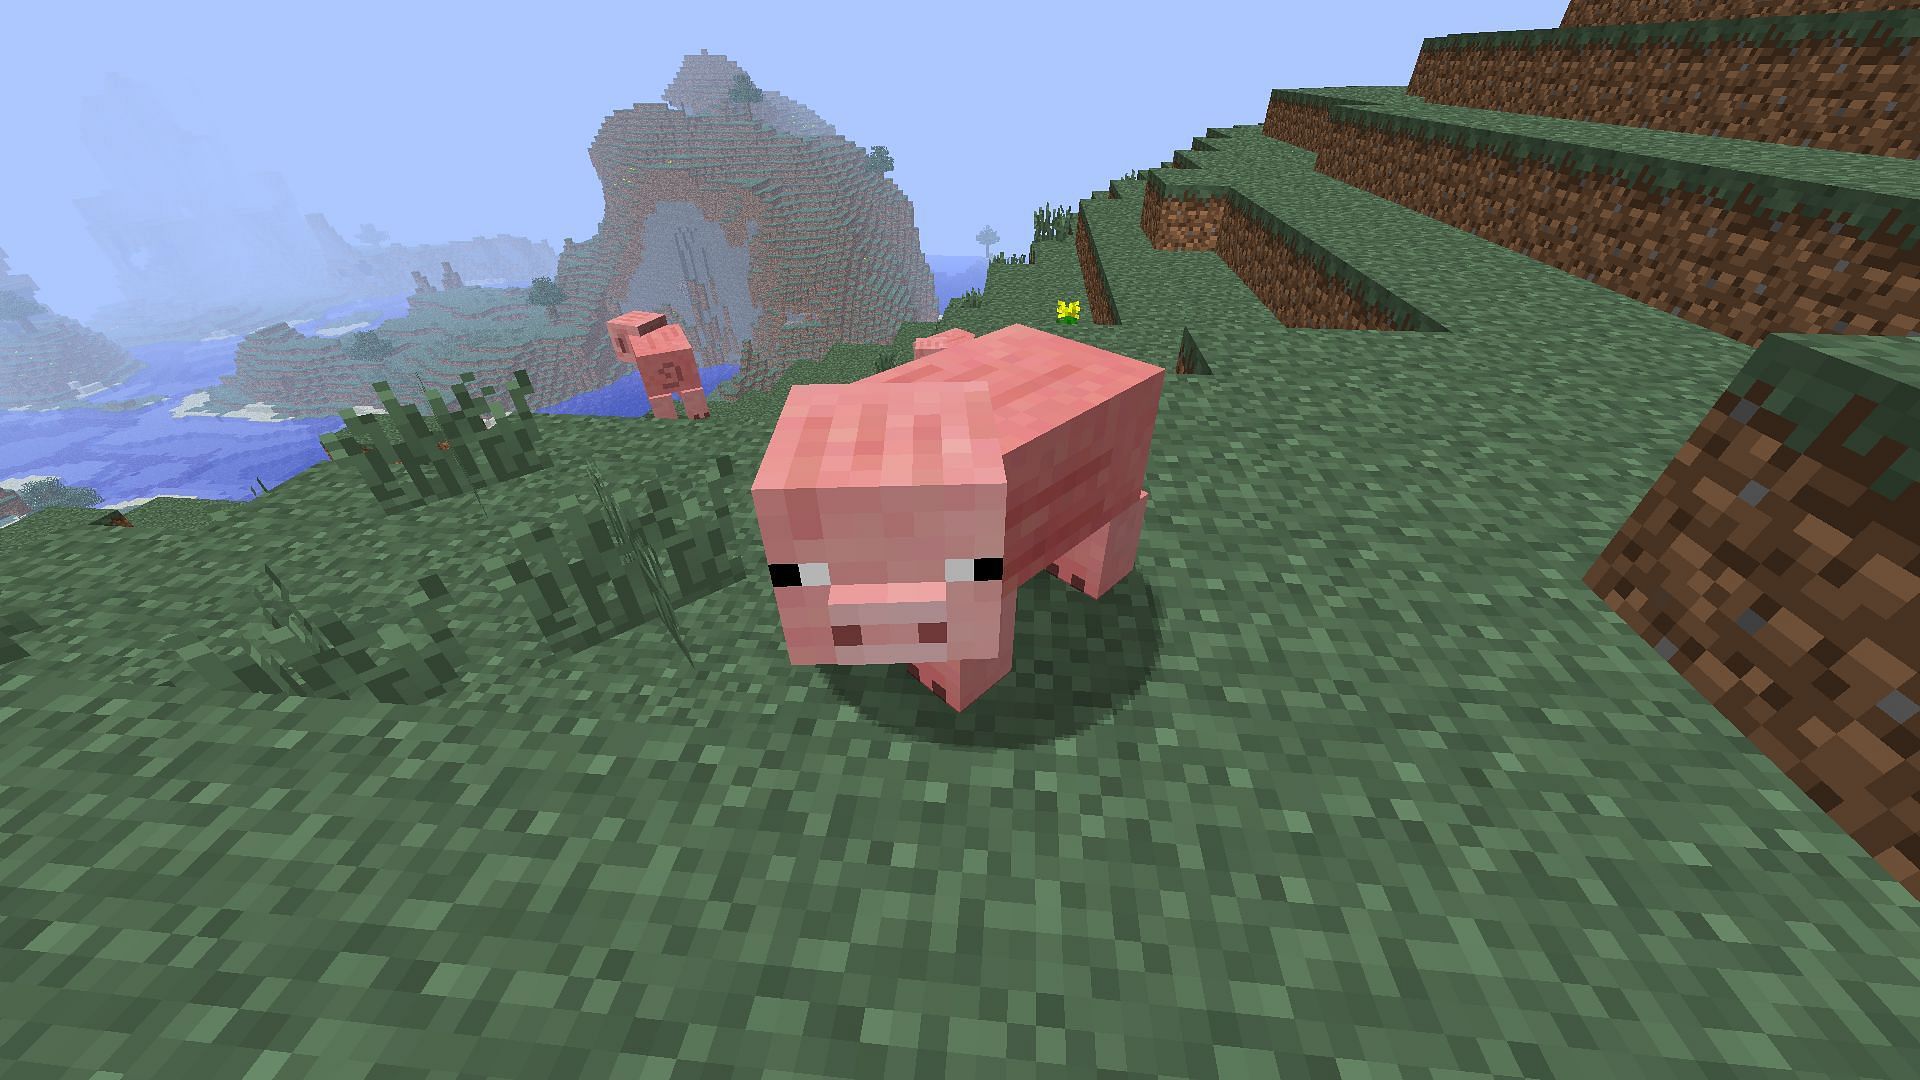 Pigs were the first passive mob added to Minecraft (Image via Mojang)